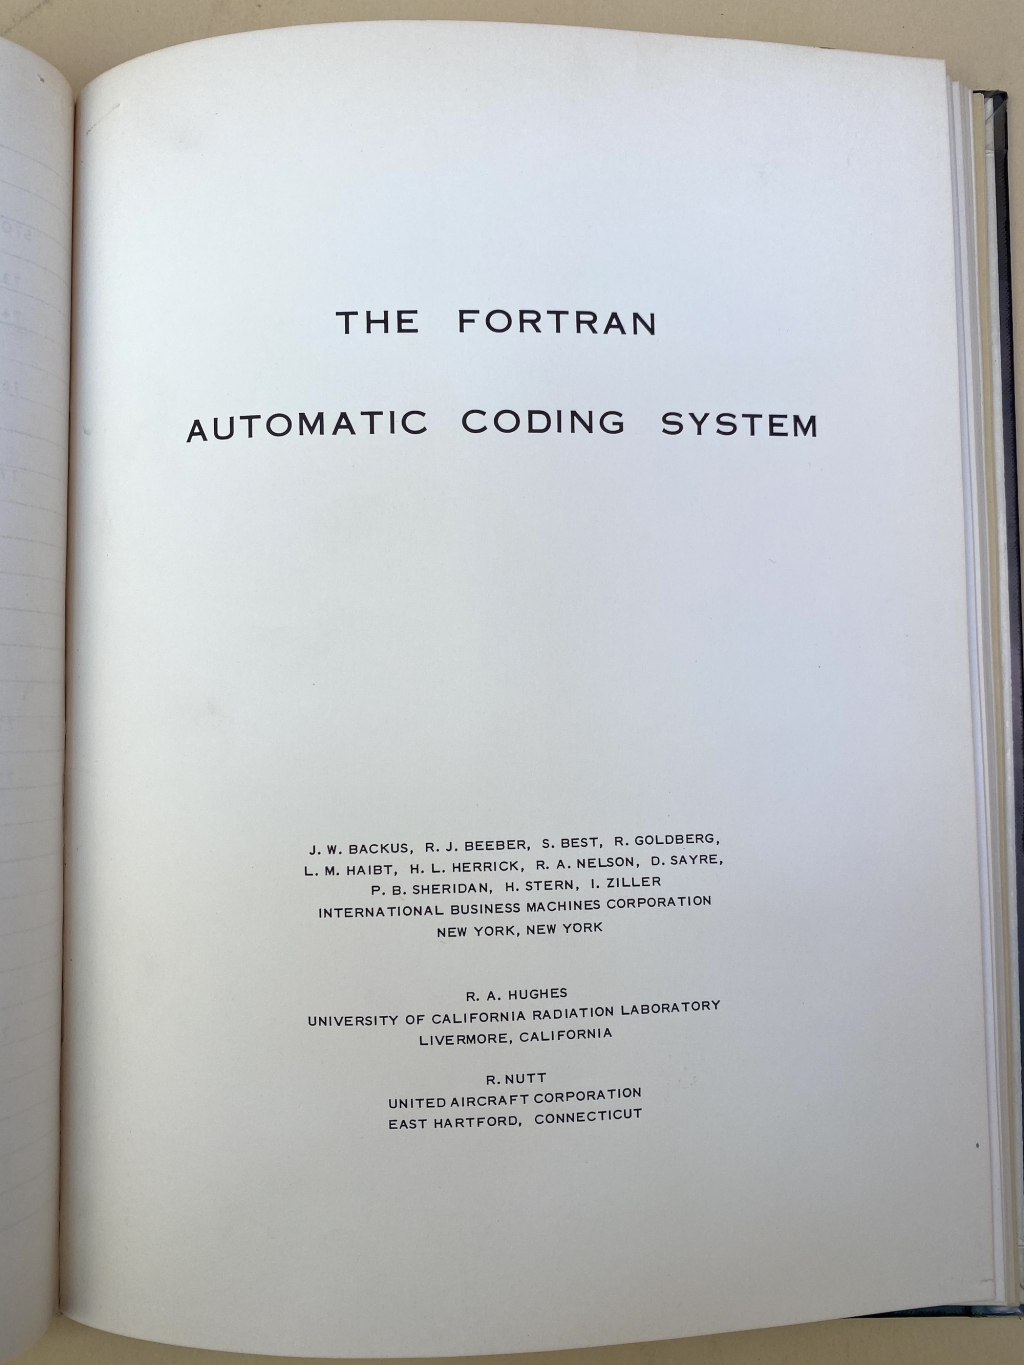 Title page for The Fortran Automatic Coding System preliminary version